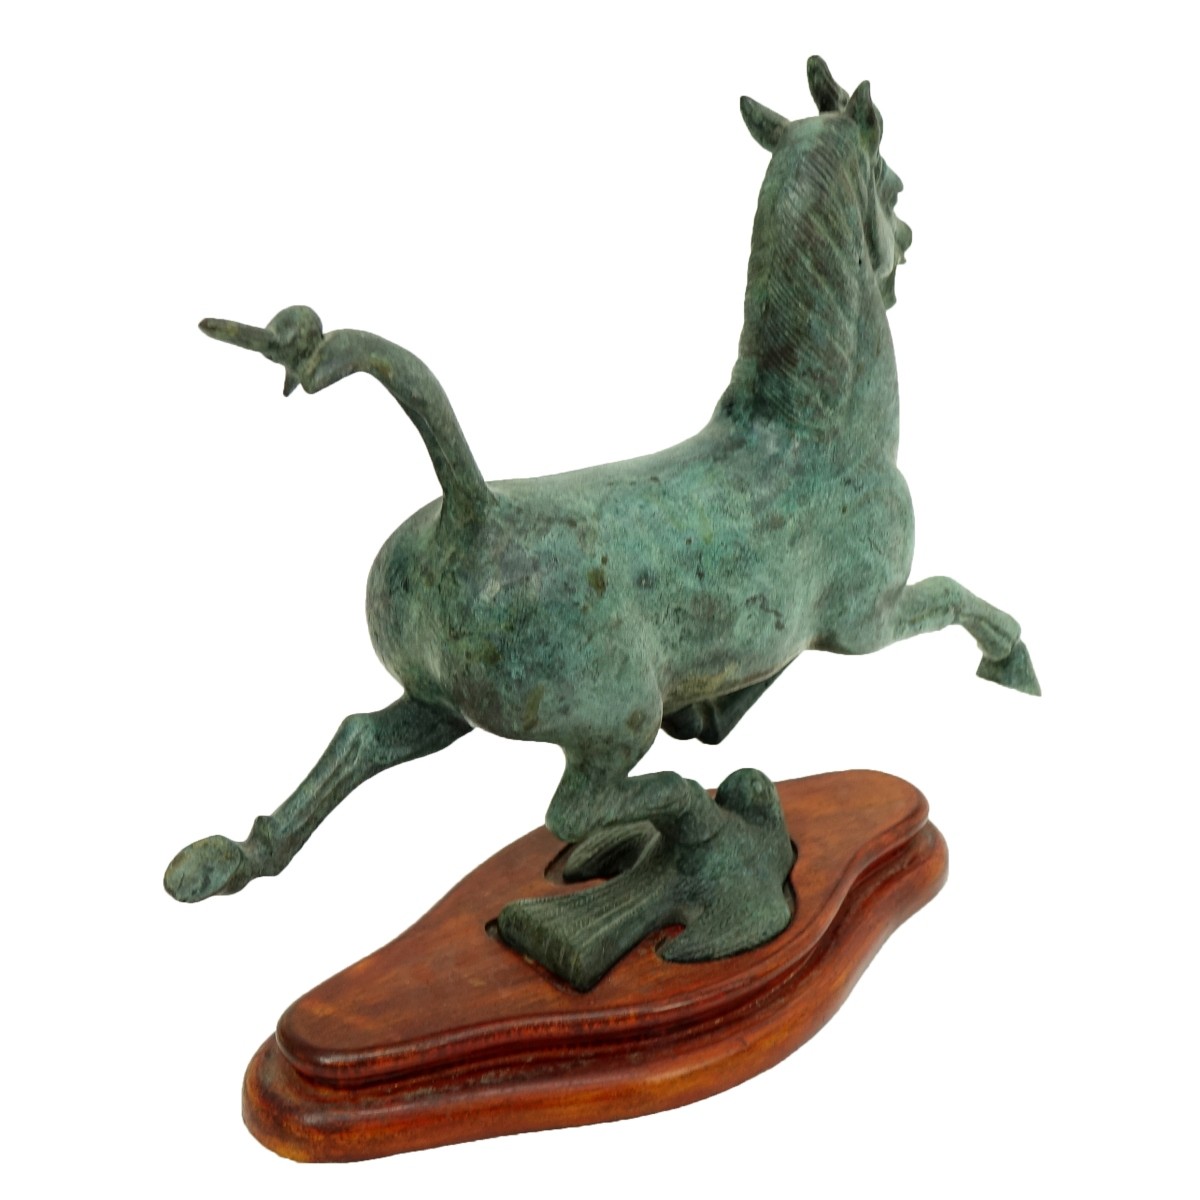 Chinese "Flying Horse of Kansu" Sculpture